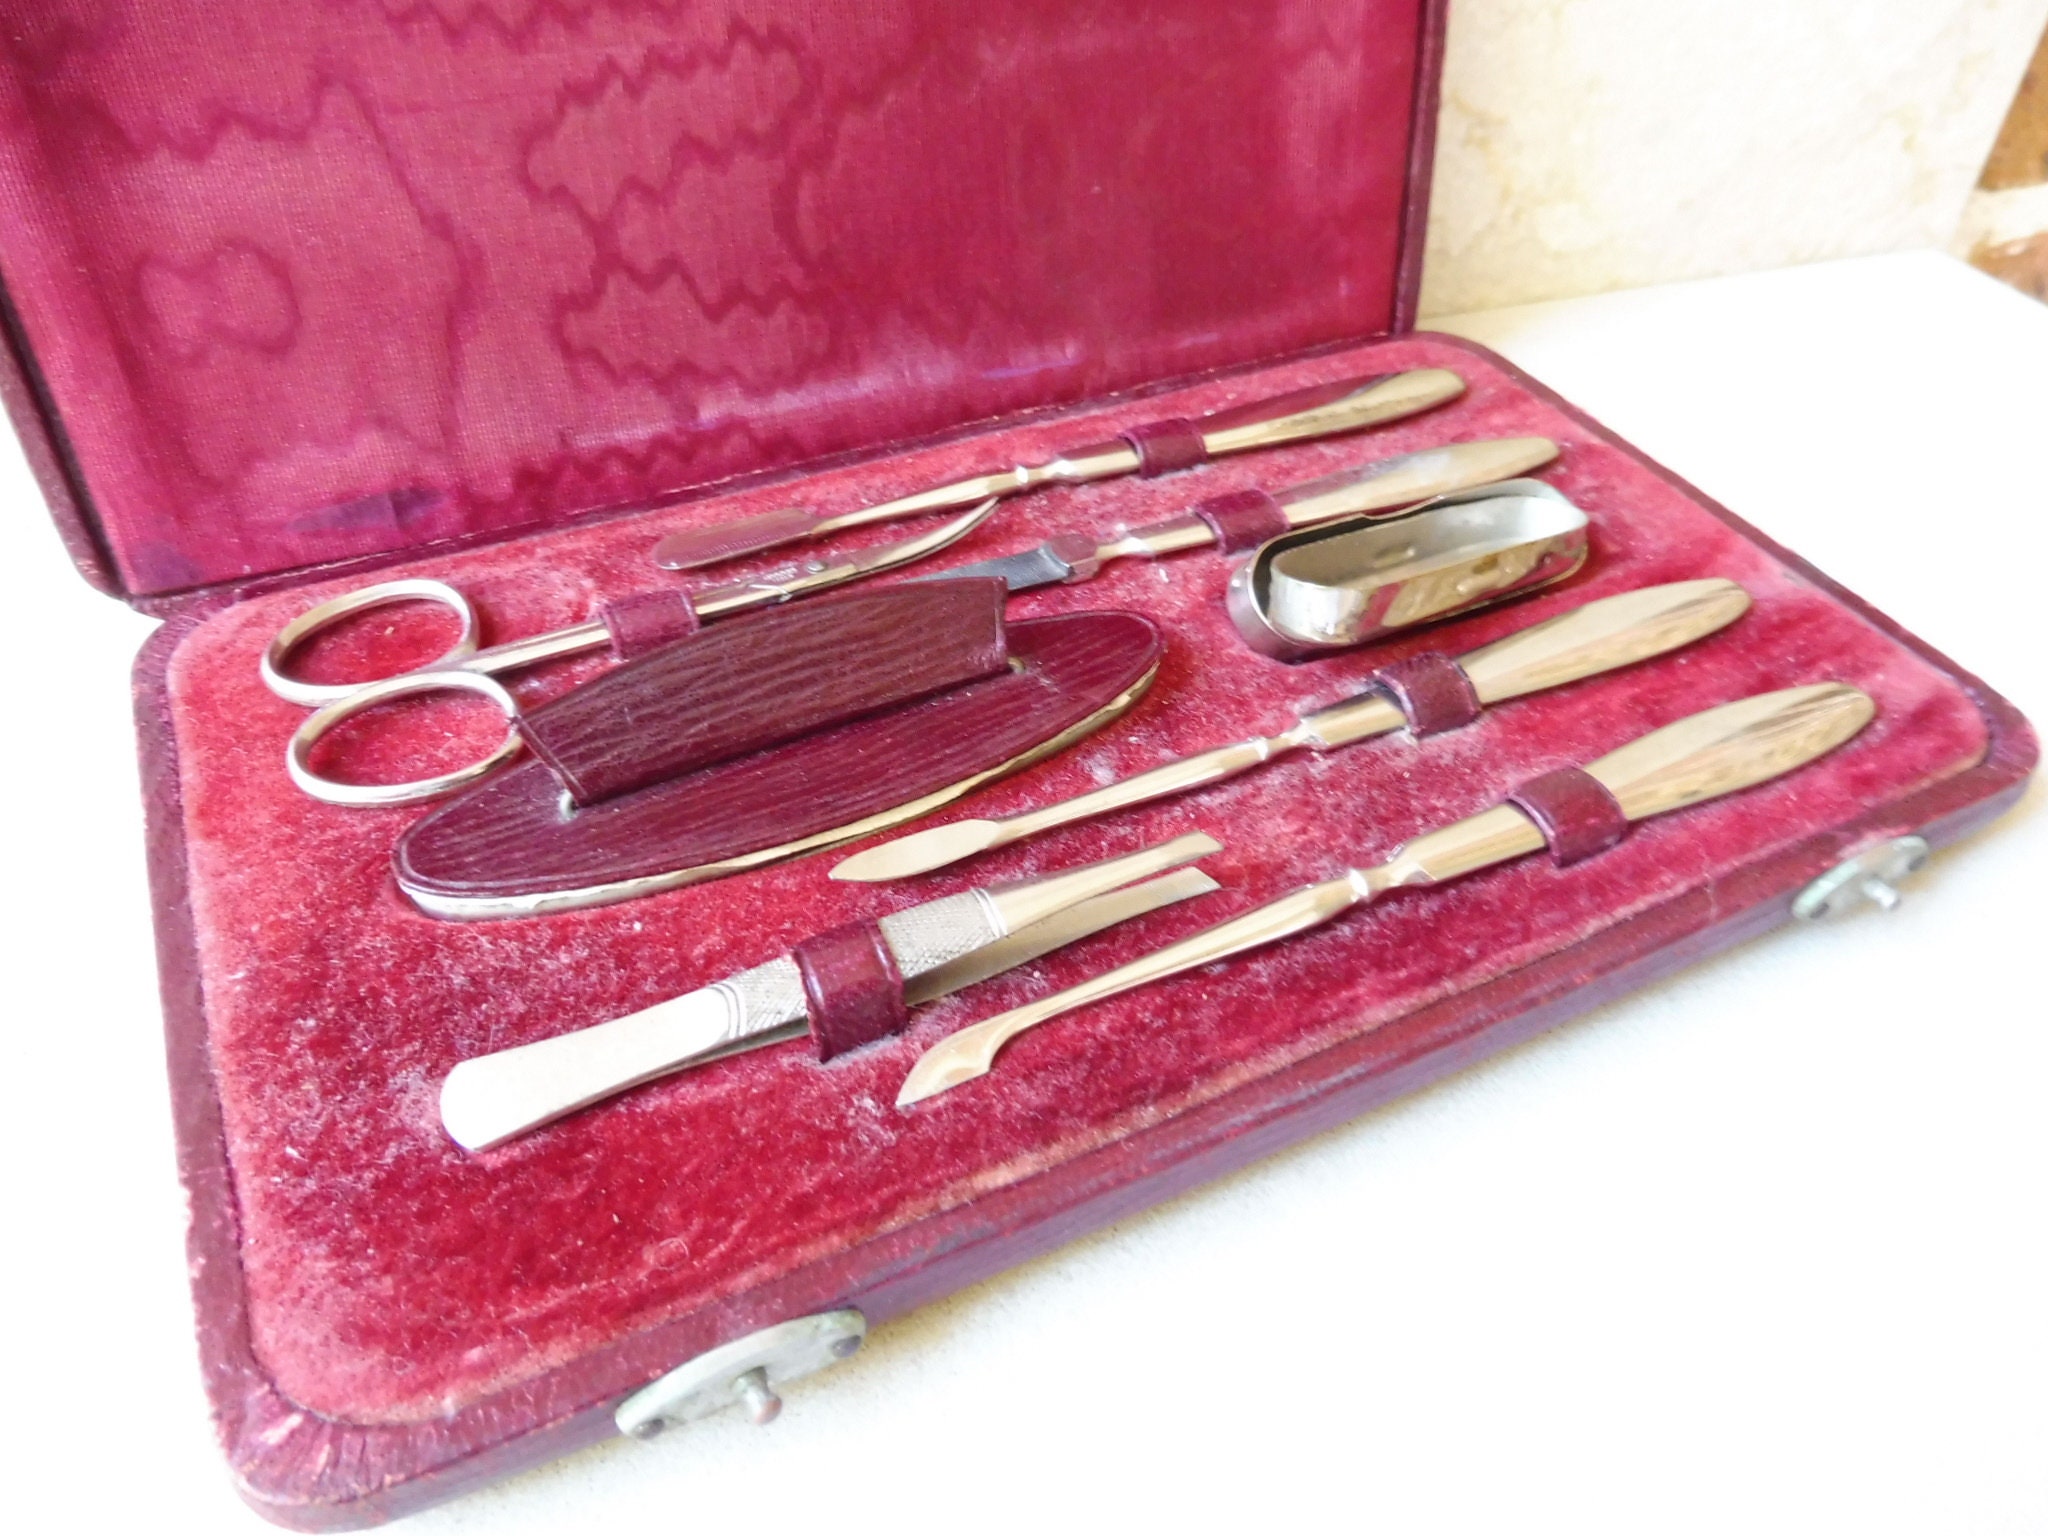 Adorable Vintage Mini Nail Kit for Travel or Purse, Red Leather Snap Purse Manicure  Kit With Mini Tools, Made in Germany E Maussner Solingen 